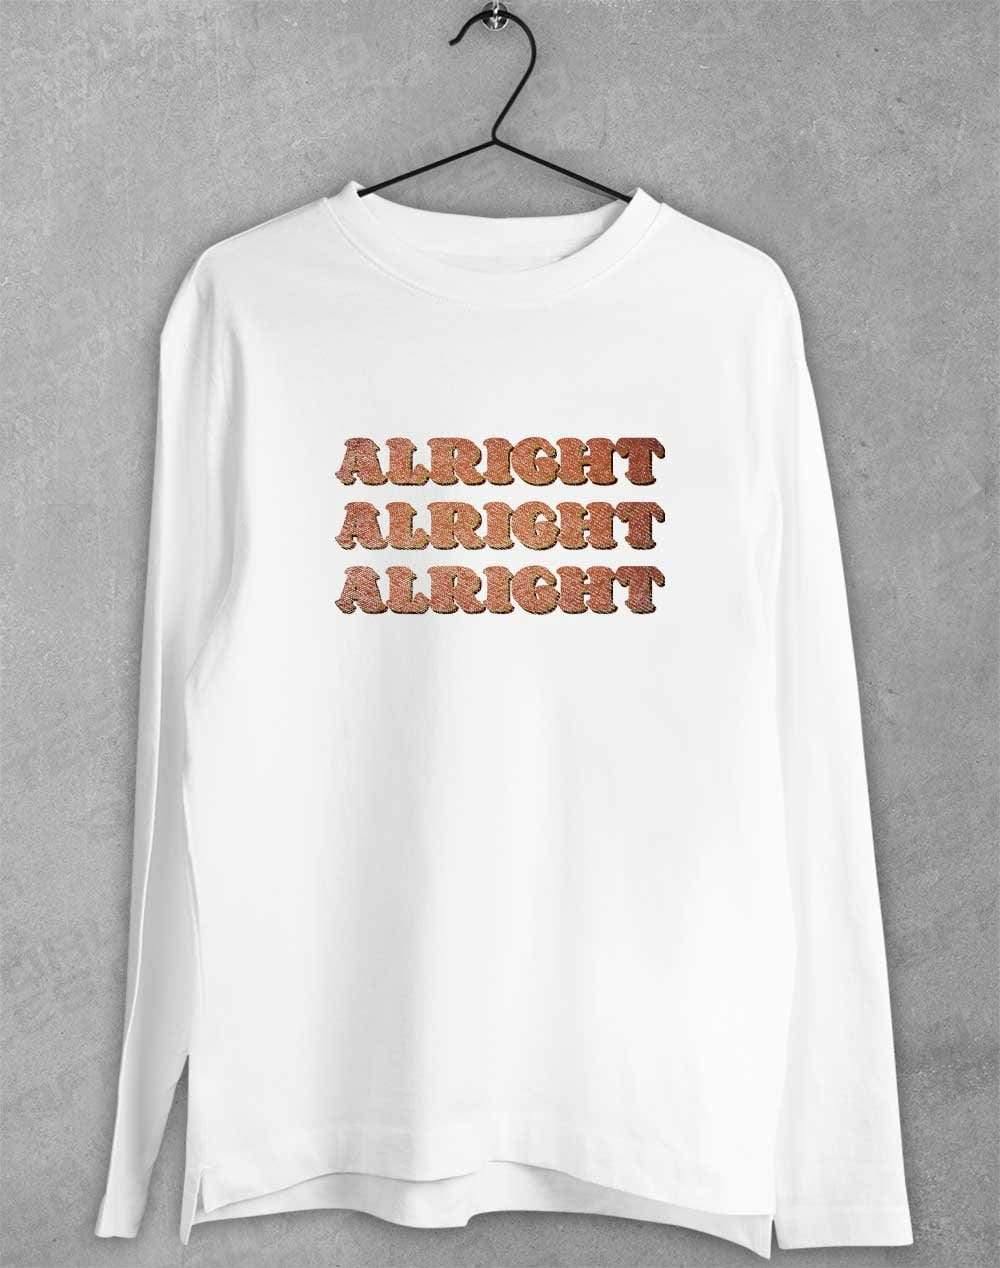 Alright Alright Alright Long Sleeve T-Shirt S / White  - Off World Tees